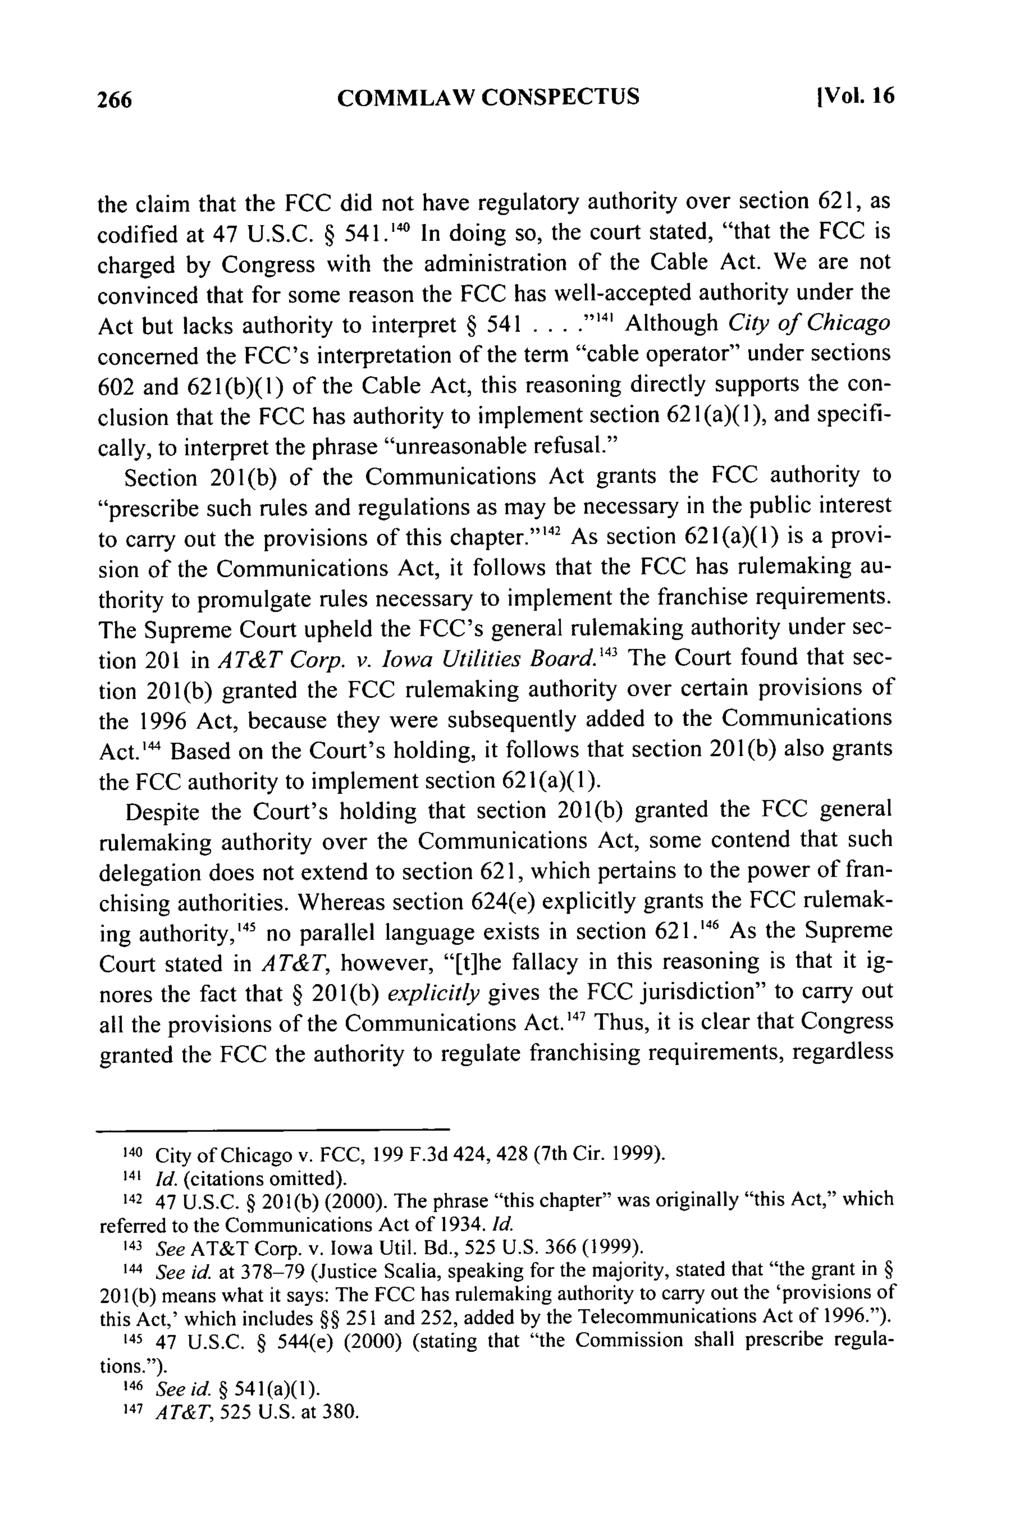 COMMLAW CONSPECTUS JVoi. 16 the claim that the FCC did not have regulatory authority over section 621, as codified at 47 U.S.C. 541.